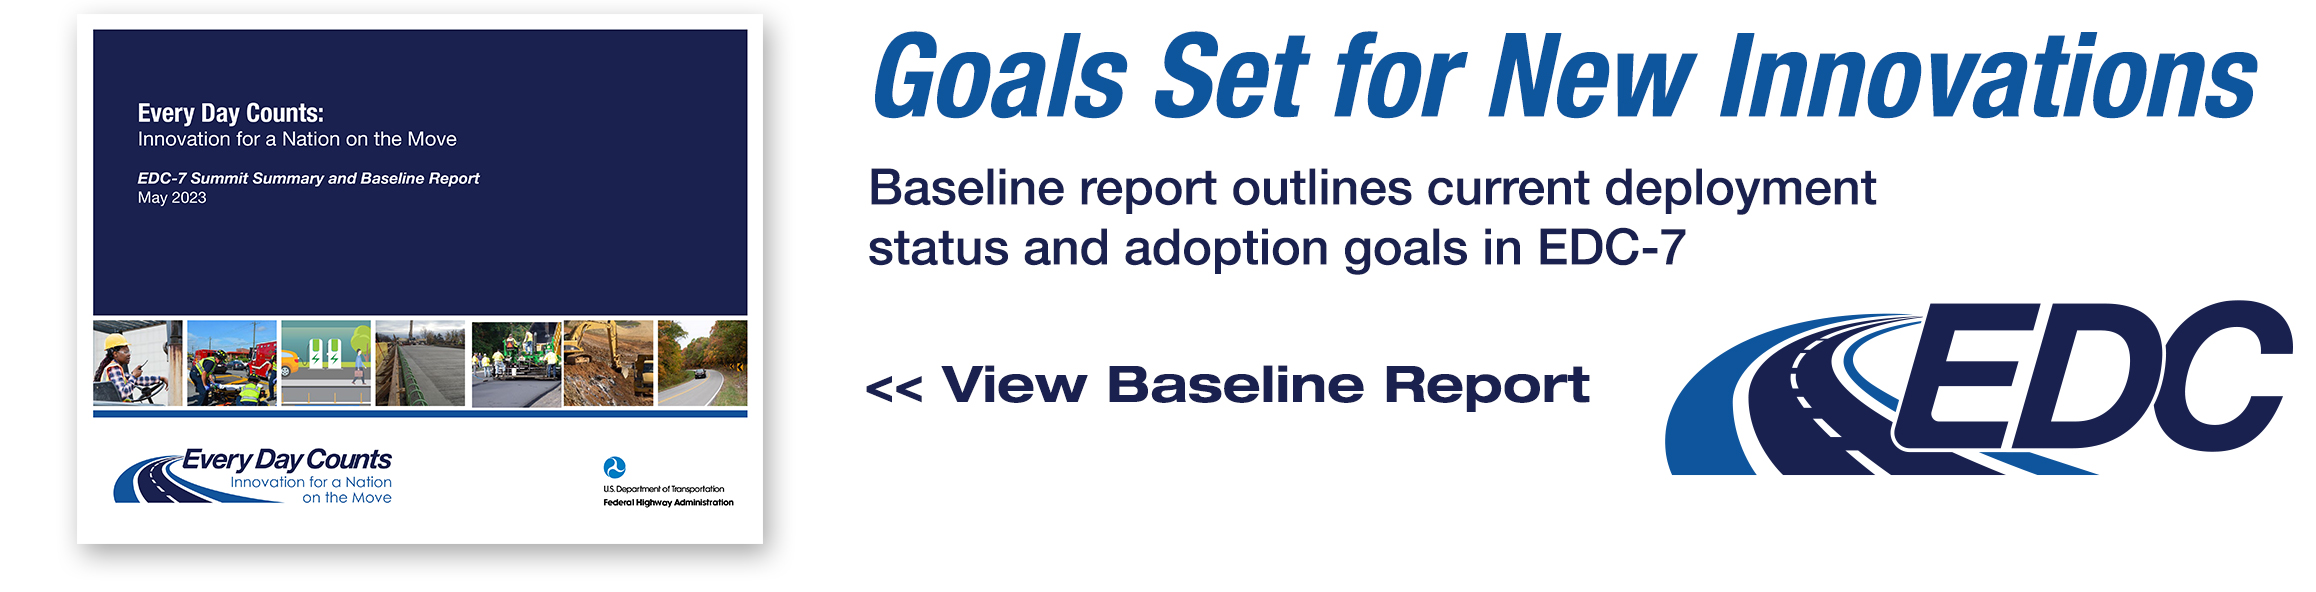 The image shows the cover of the of the EDC-7 baseline report which outlines current deployment status and adoption goals.  The text reads Goals Set for New Innovations.